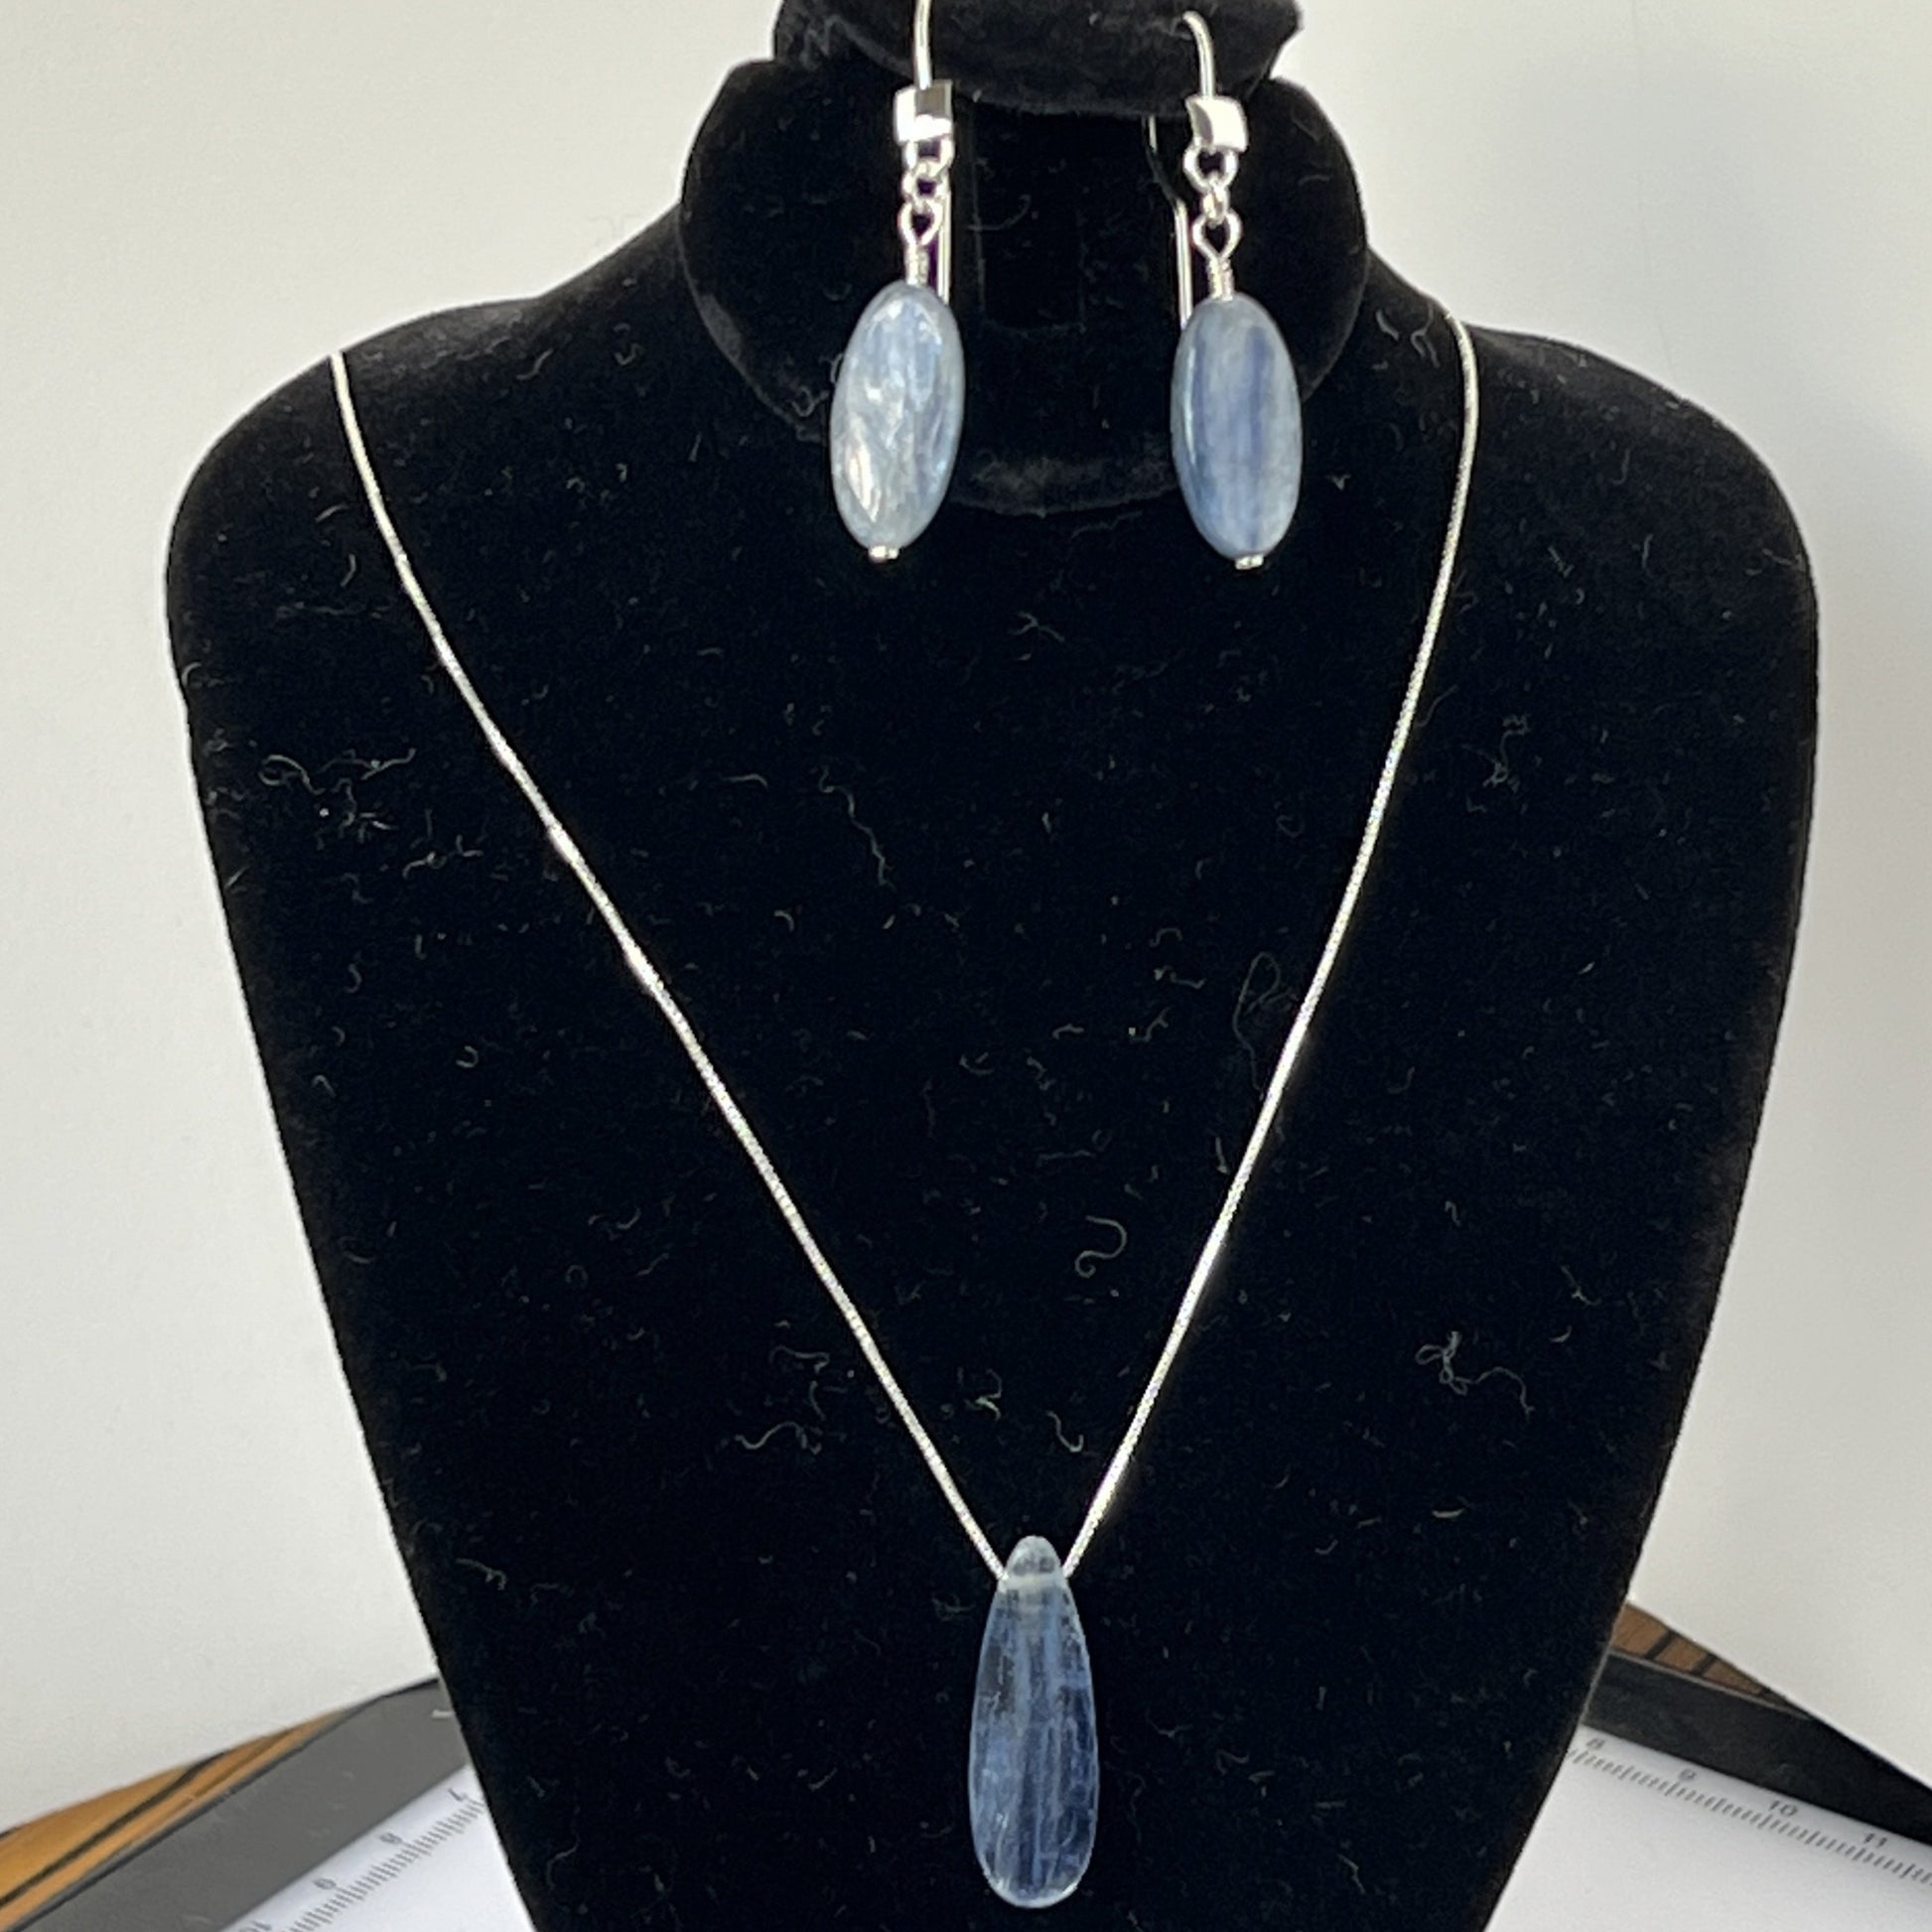 Kyanite oval earrings and teardrop kyanite necklace with maget clasp